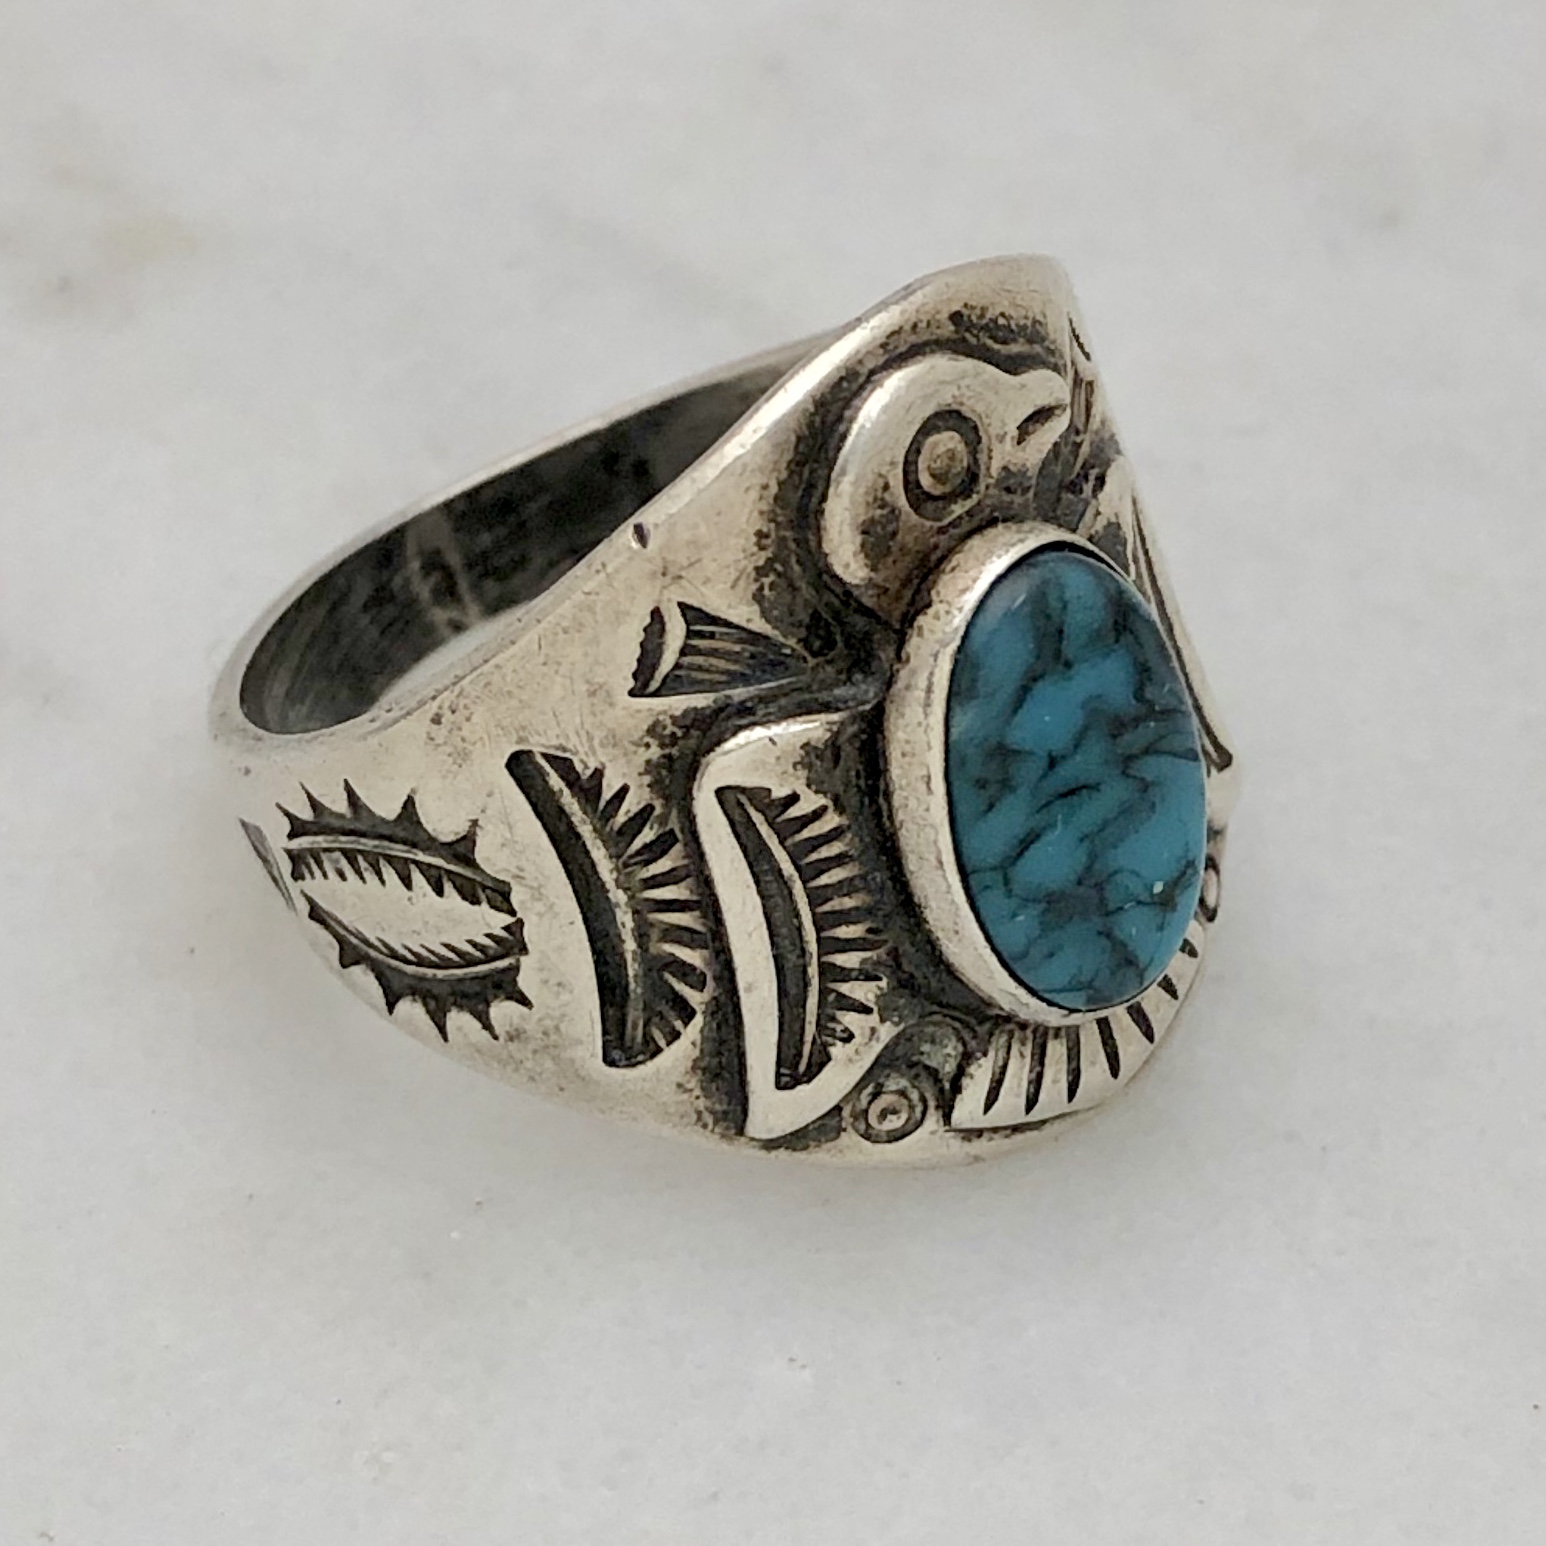 Size 11  Vintage Fred Harvey era Navajo heavy sterling silver Men’s chunky signet ring with thunderbird appliqué and stamped detail